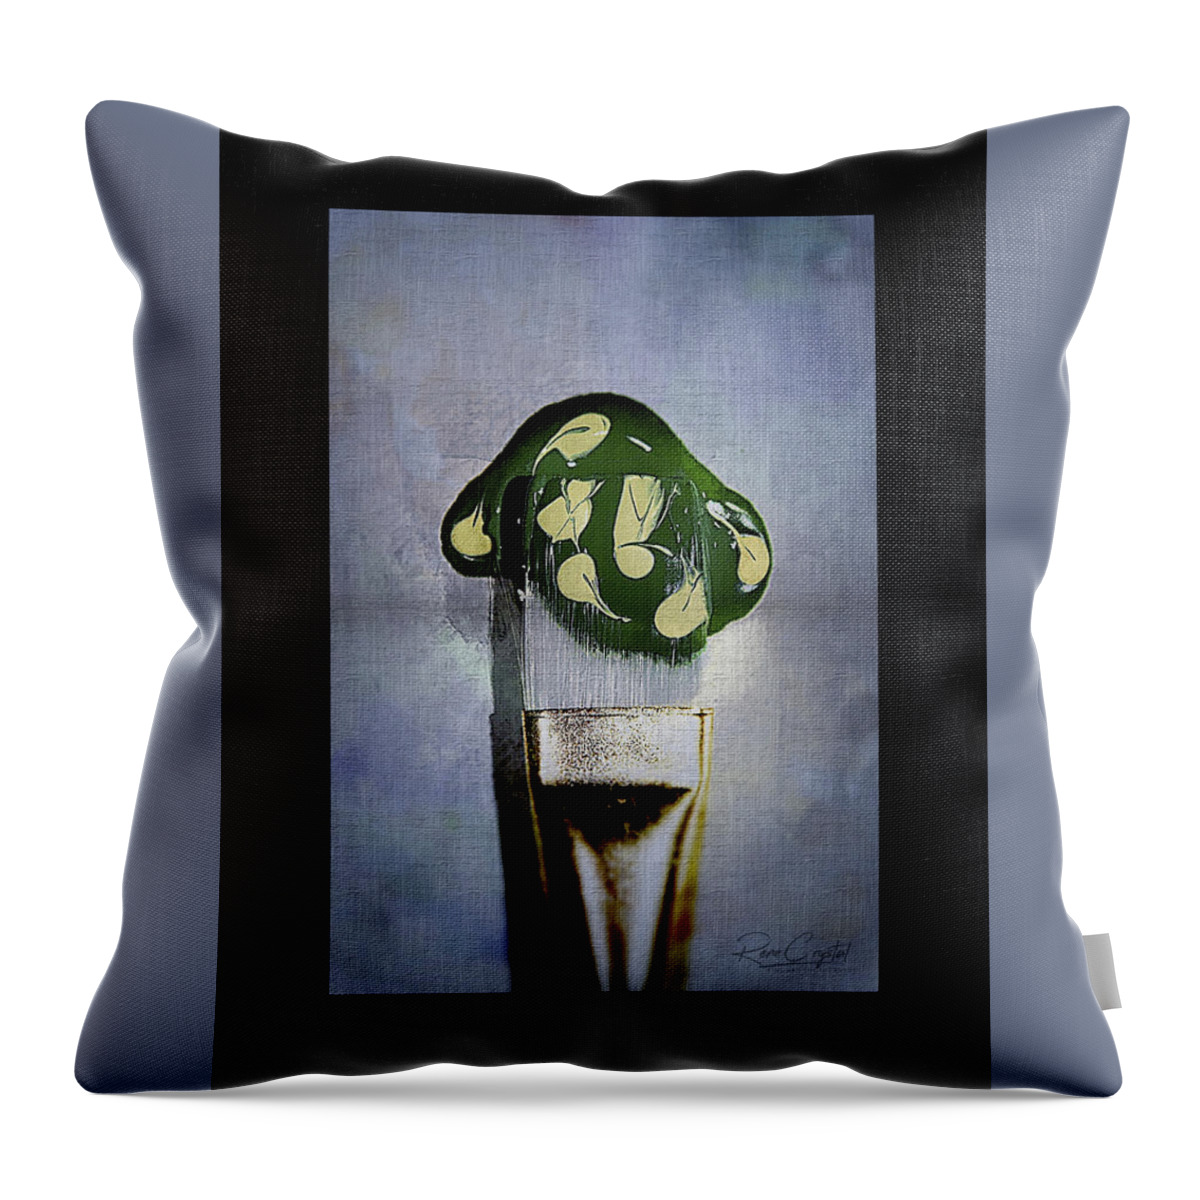 Painting Throw Pillow featuring the photograph A Brush Art Happening by Rene Crystal